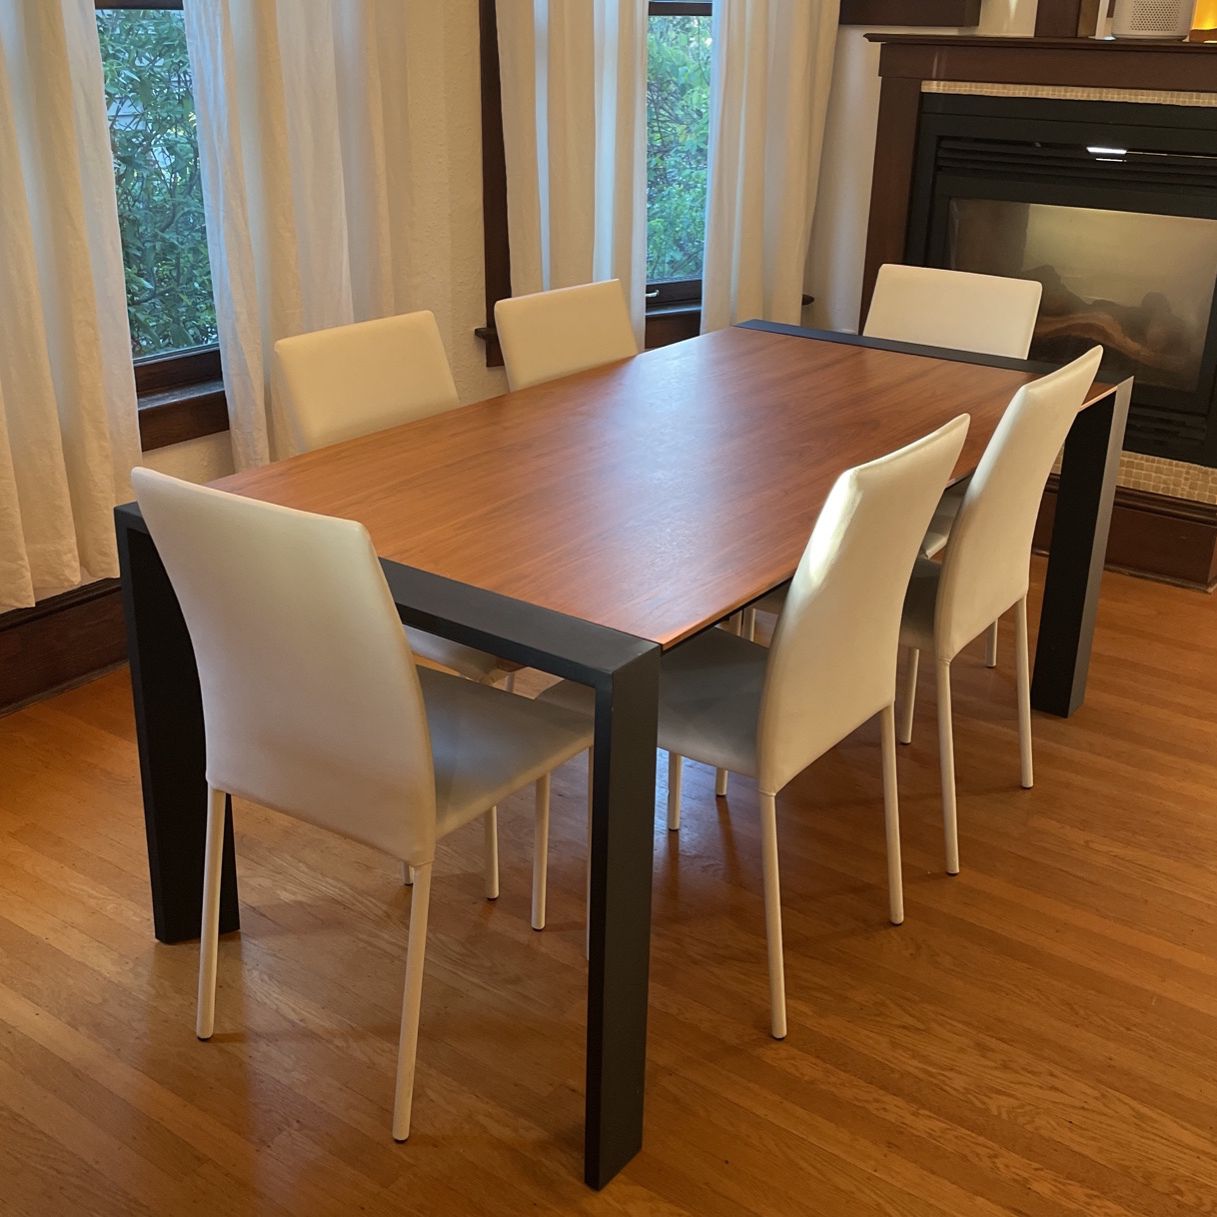 Dining Table Without Chairs